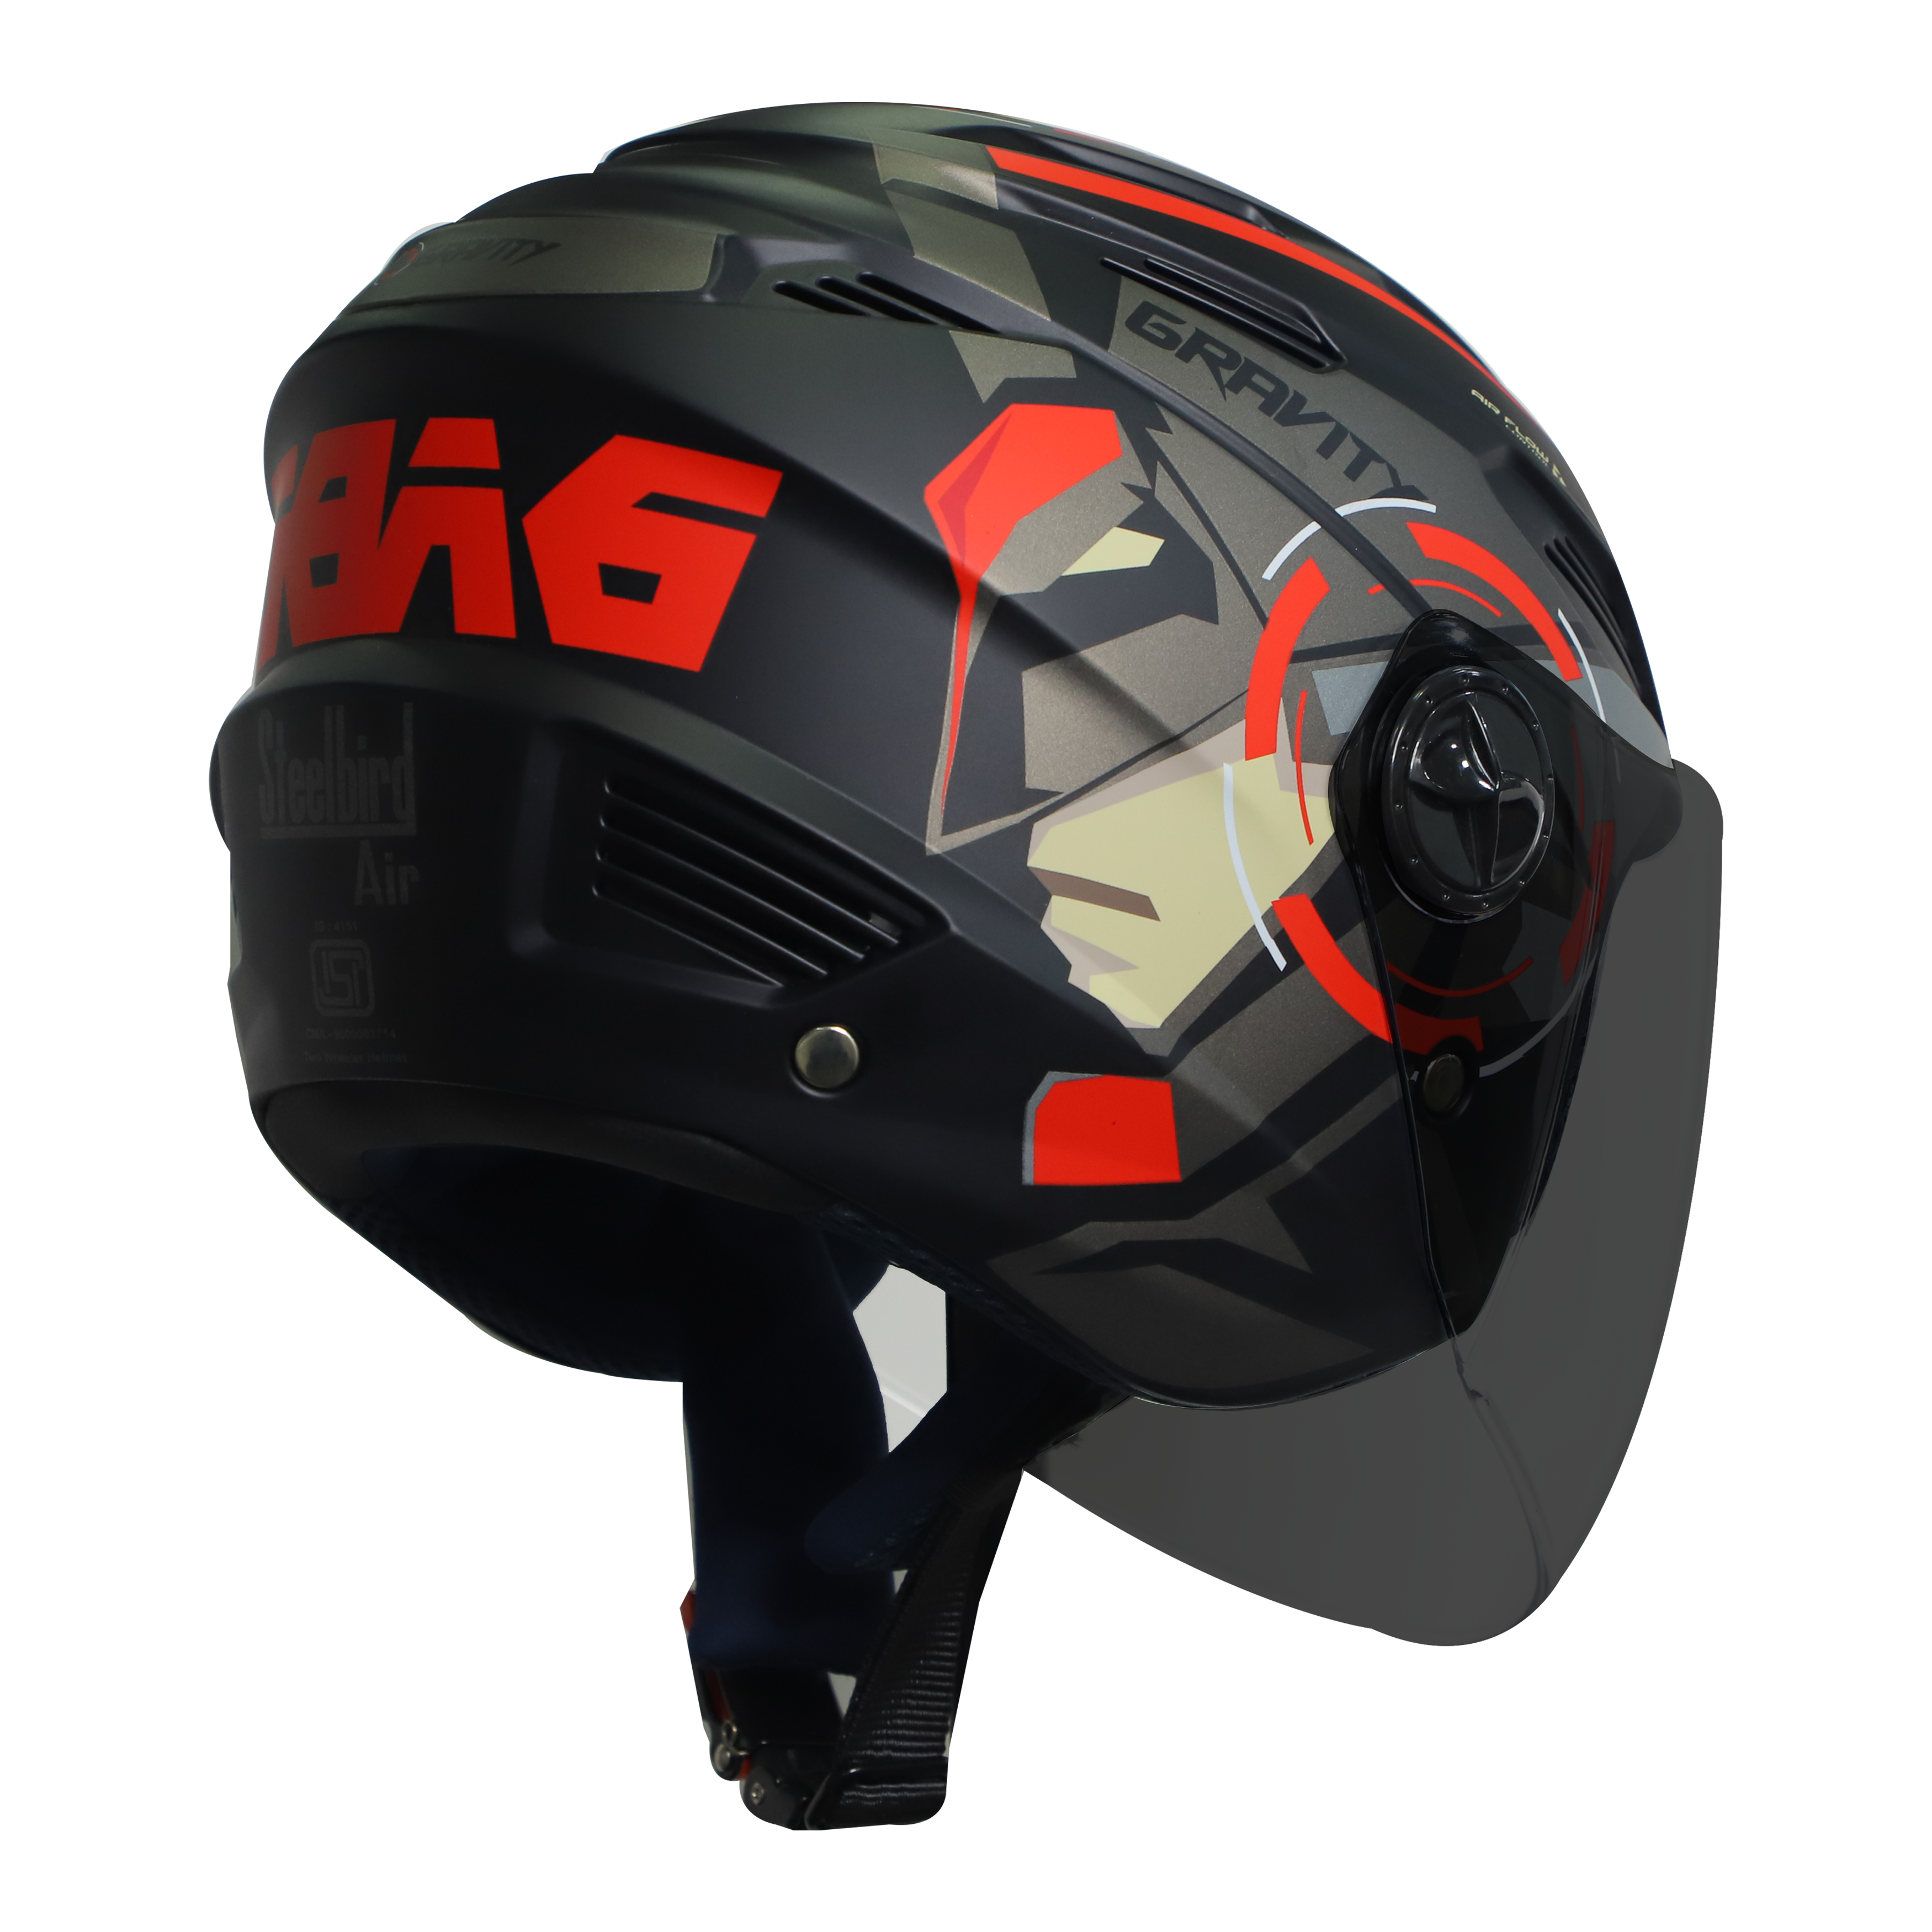 SBA-6 GRAVITY MAT BLACK WITH RED (FITTED WITH CLEAR VISOR EXTRA SMOKE VISOR FREE)